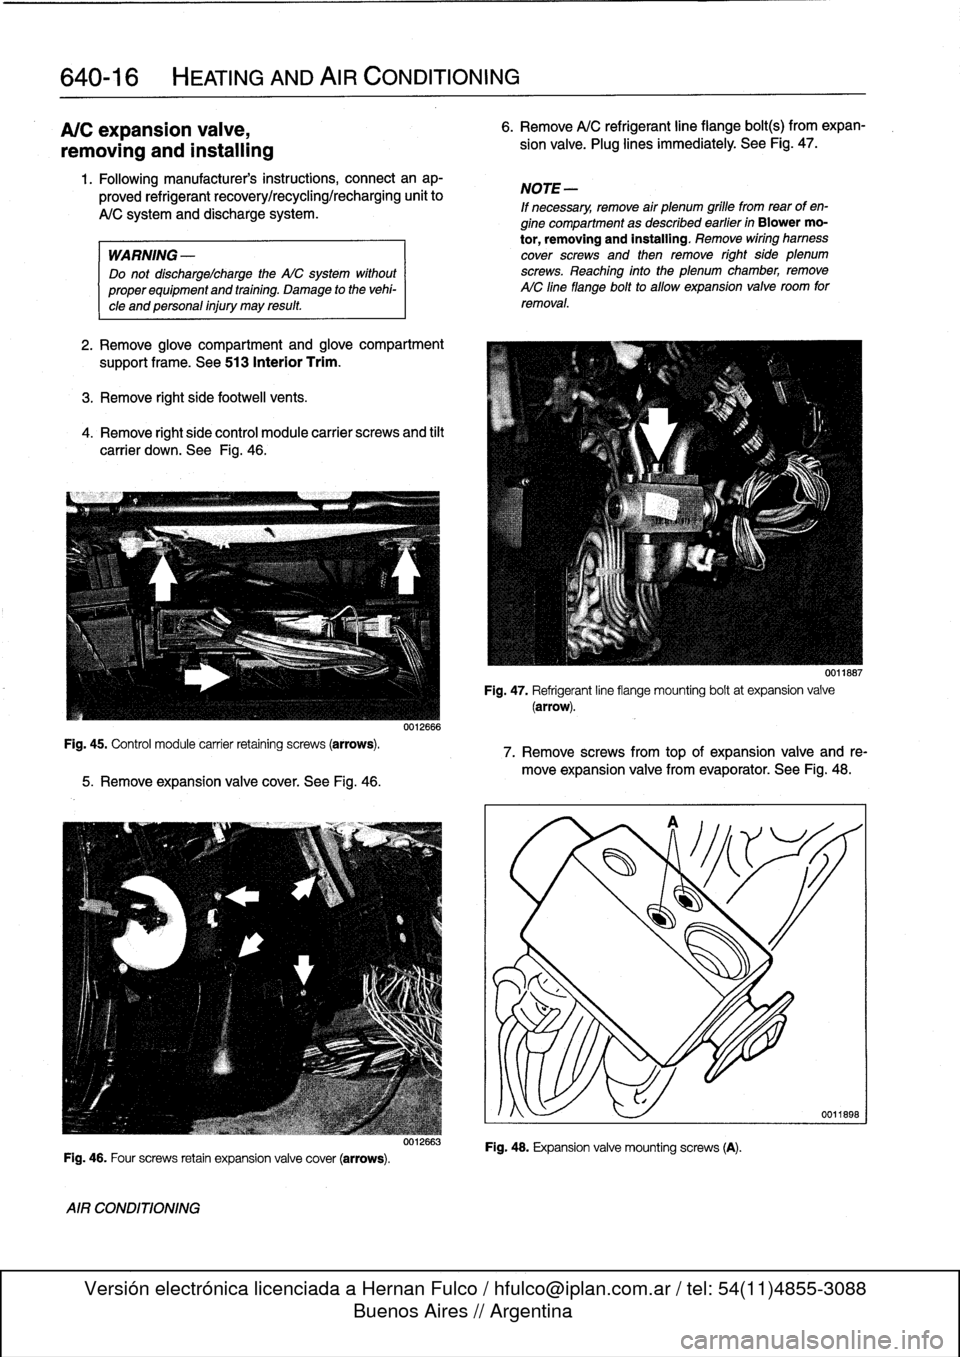 BMW 323i 1993 E36 Owners Manual 
640-16

	

HEATING
AND
AIR
CONDITIONING

A/C
expansion
valve,

removing
and
installing

Fig
.
45
.
Control
module
carrier
retaining
screws
(arrows)
.

1
.
Following
manufacturers
instructions,
connec